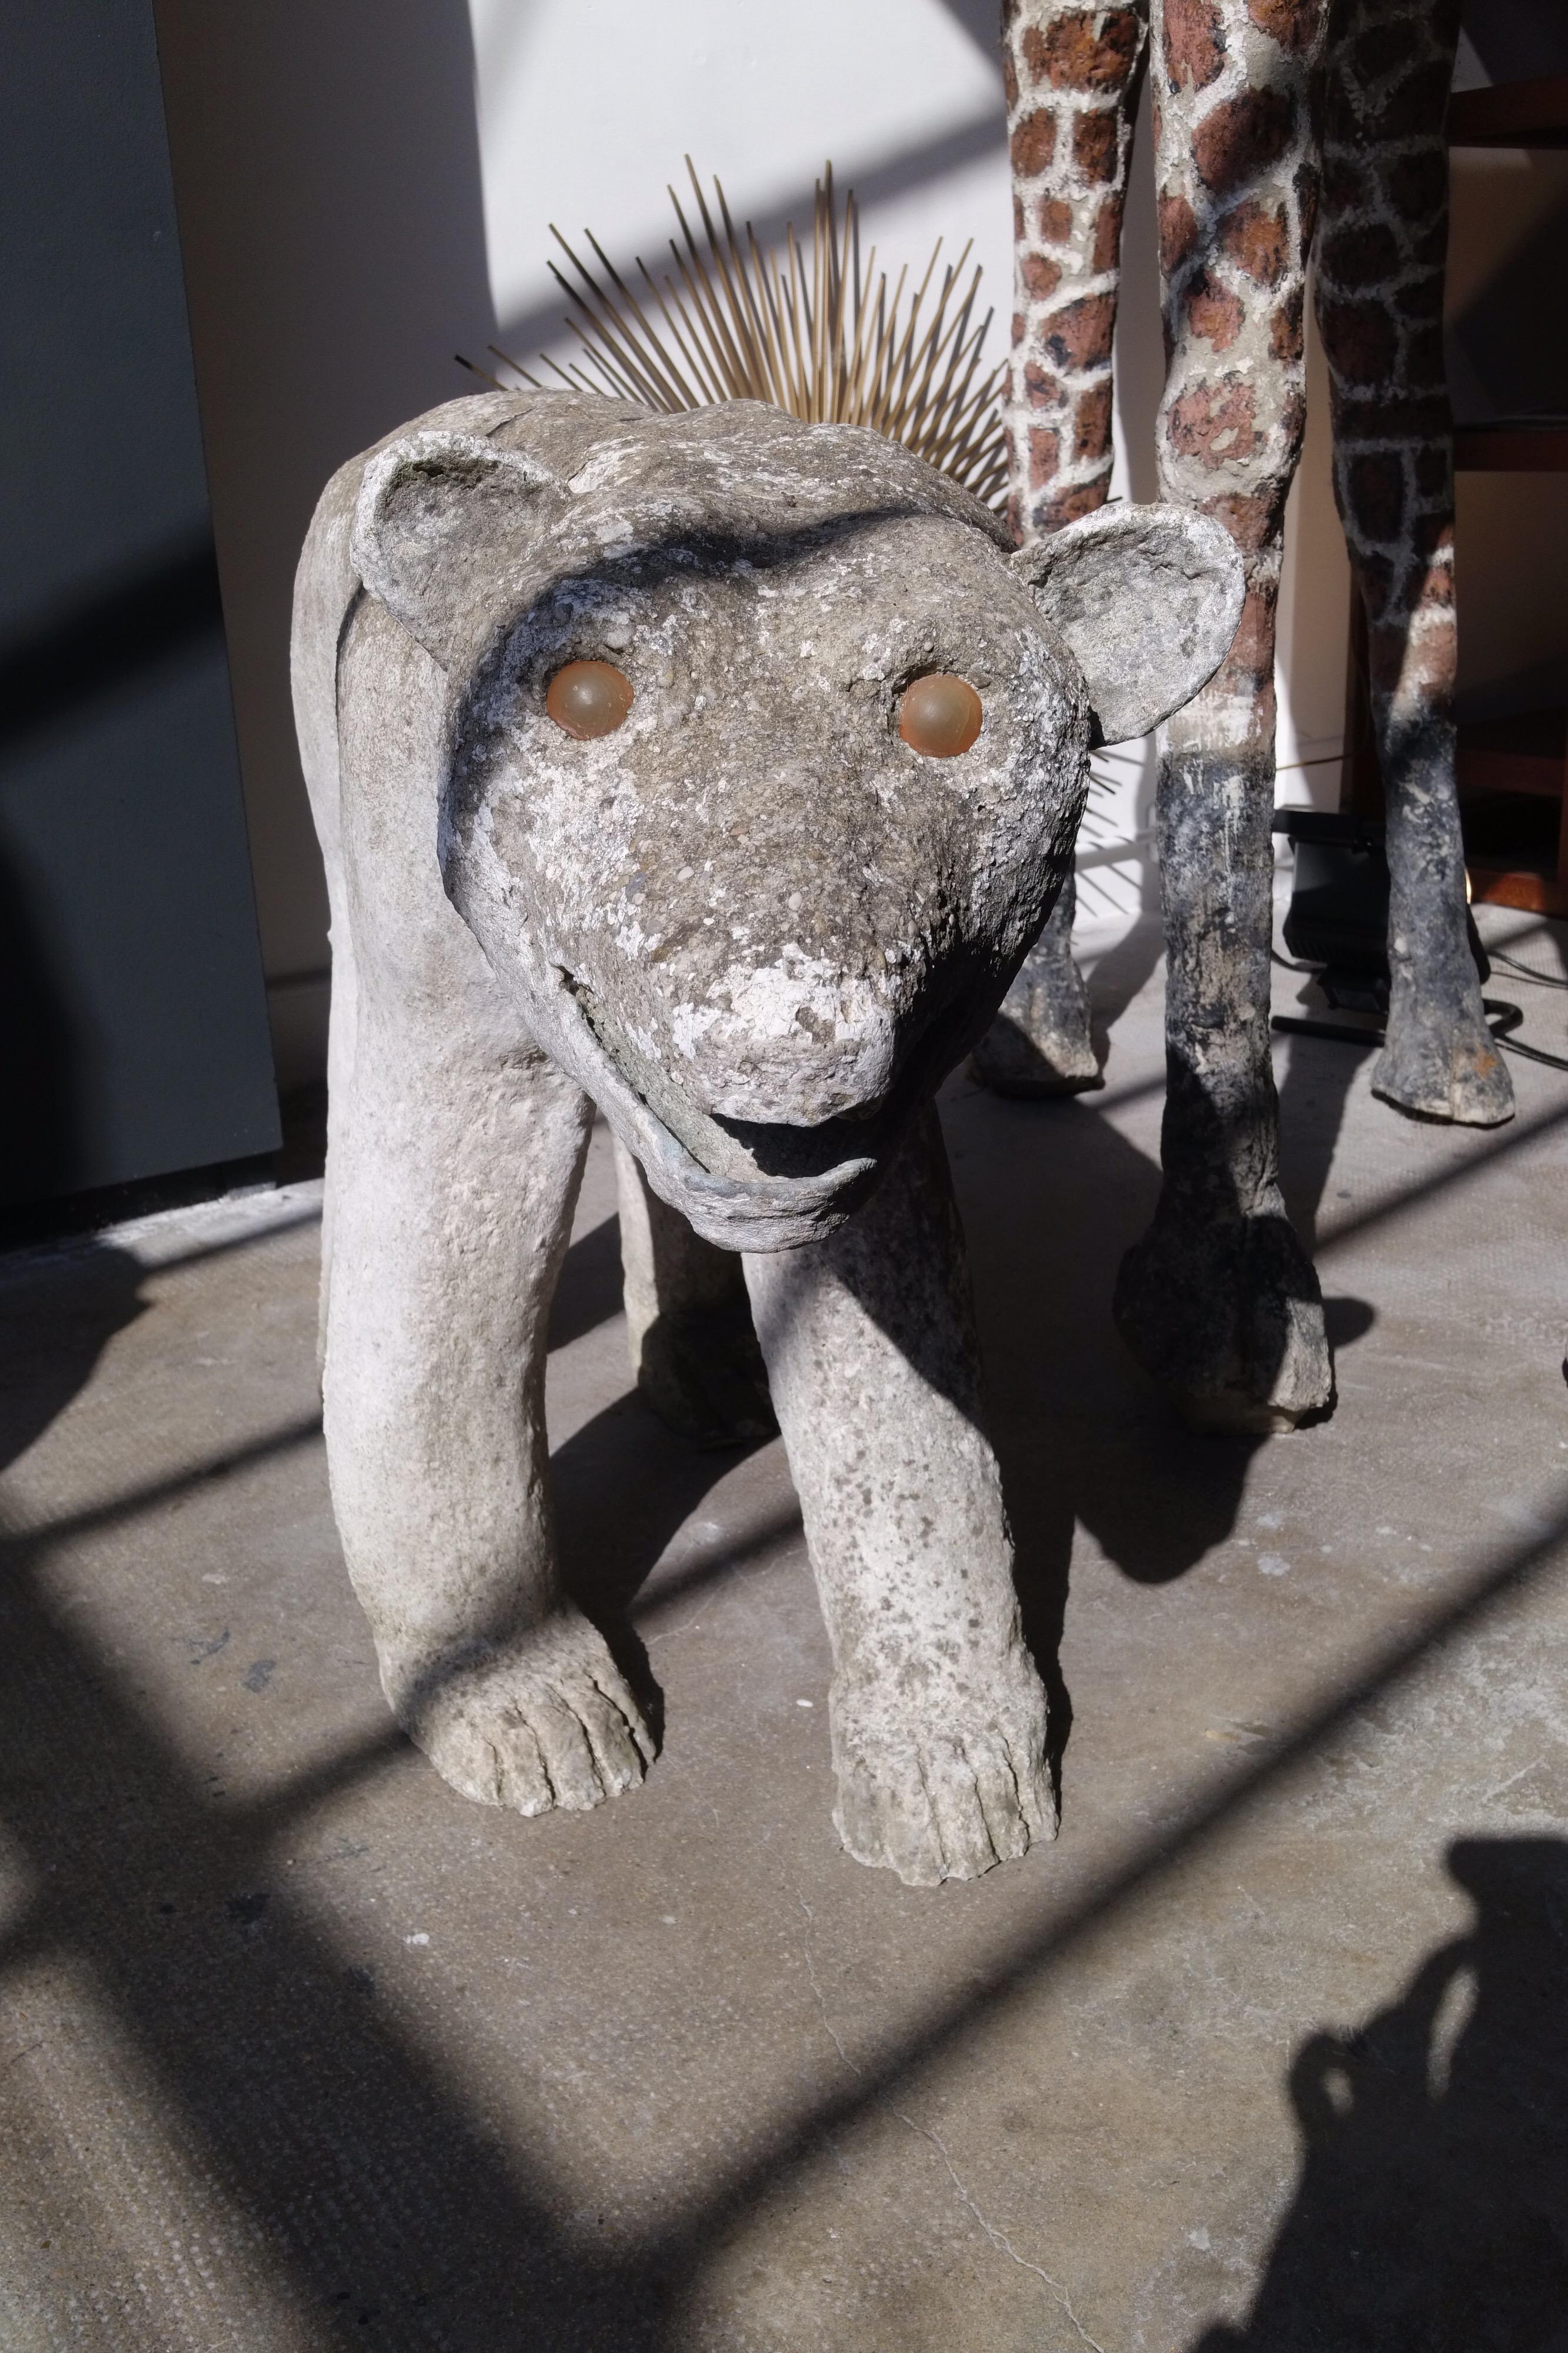 painted concrete bear statue coming from a Normandy zoo, France, circa 1900
Grey.